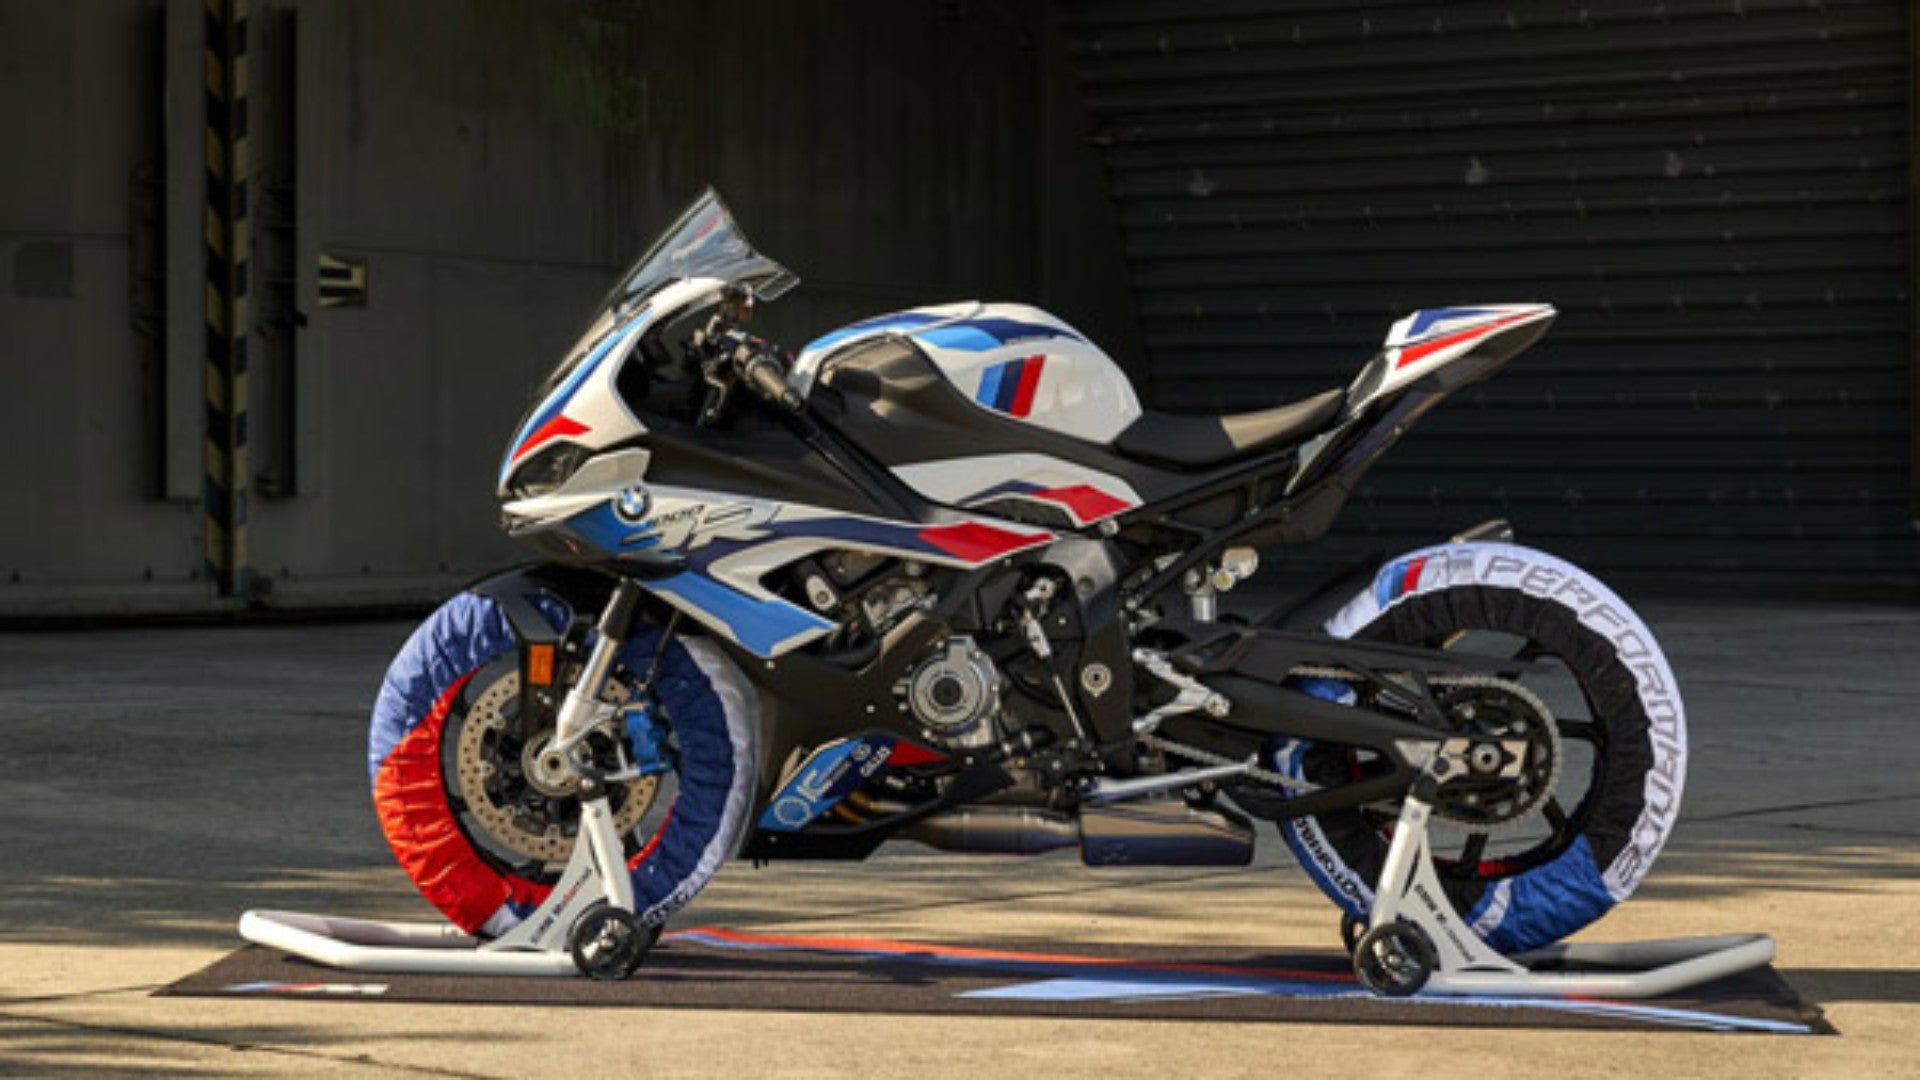 Meet The First Ever BMW M Motorcycle: The 212 HP M 1000 RR